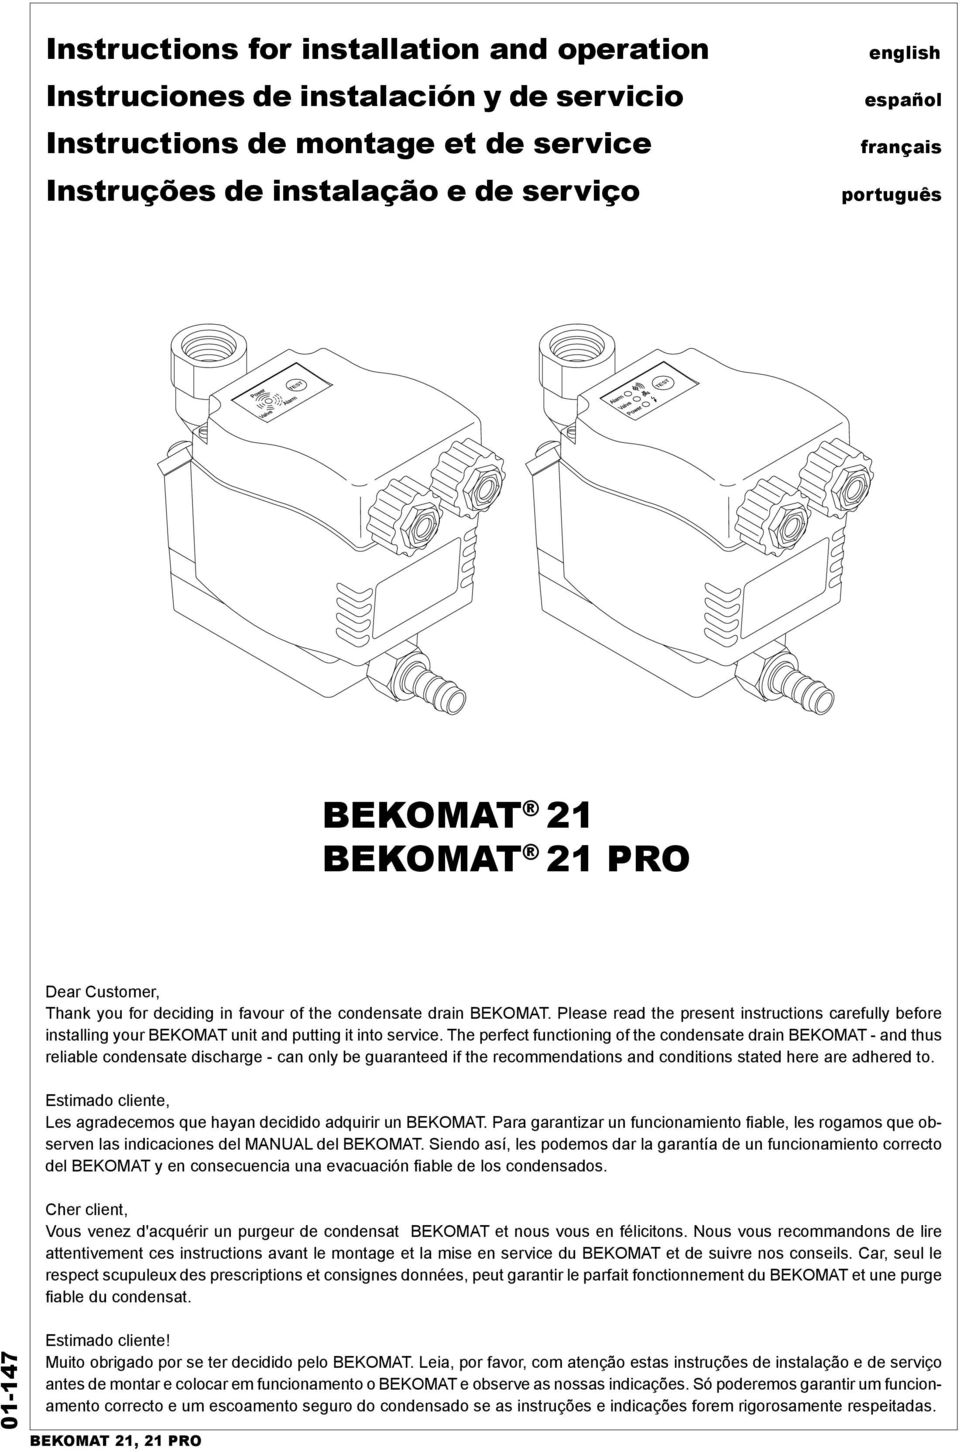 Please read the present instructions carefully before installing your BEKOMAT unit and putting it into service.